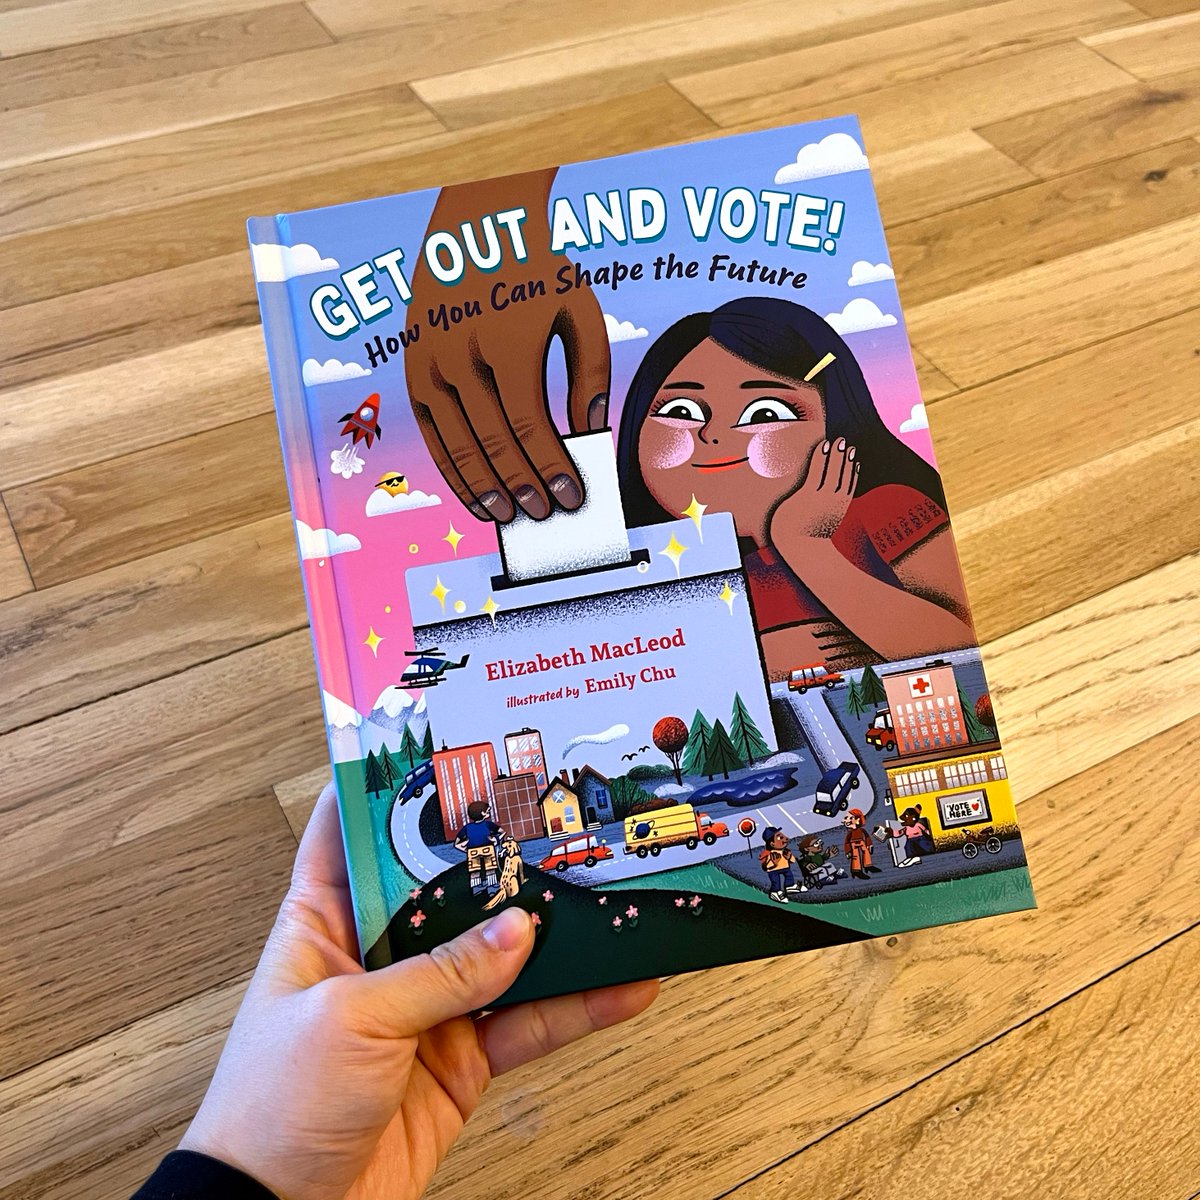 WOOHOO! My new book will be out in bookstores March 14th via @orcabook ! I just received my advance copies, and they are 😍. Doing a giveaway on the instagram too: instagram.com/p/CpftUGcpckH/ Tag your teacher pals, parents, enthusiastic voters. #kidlitart